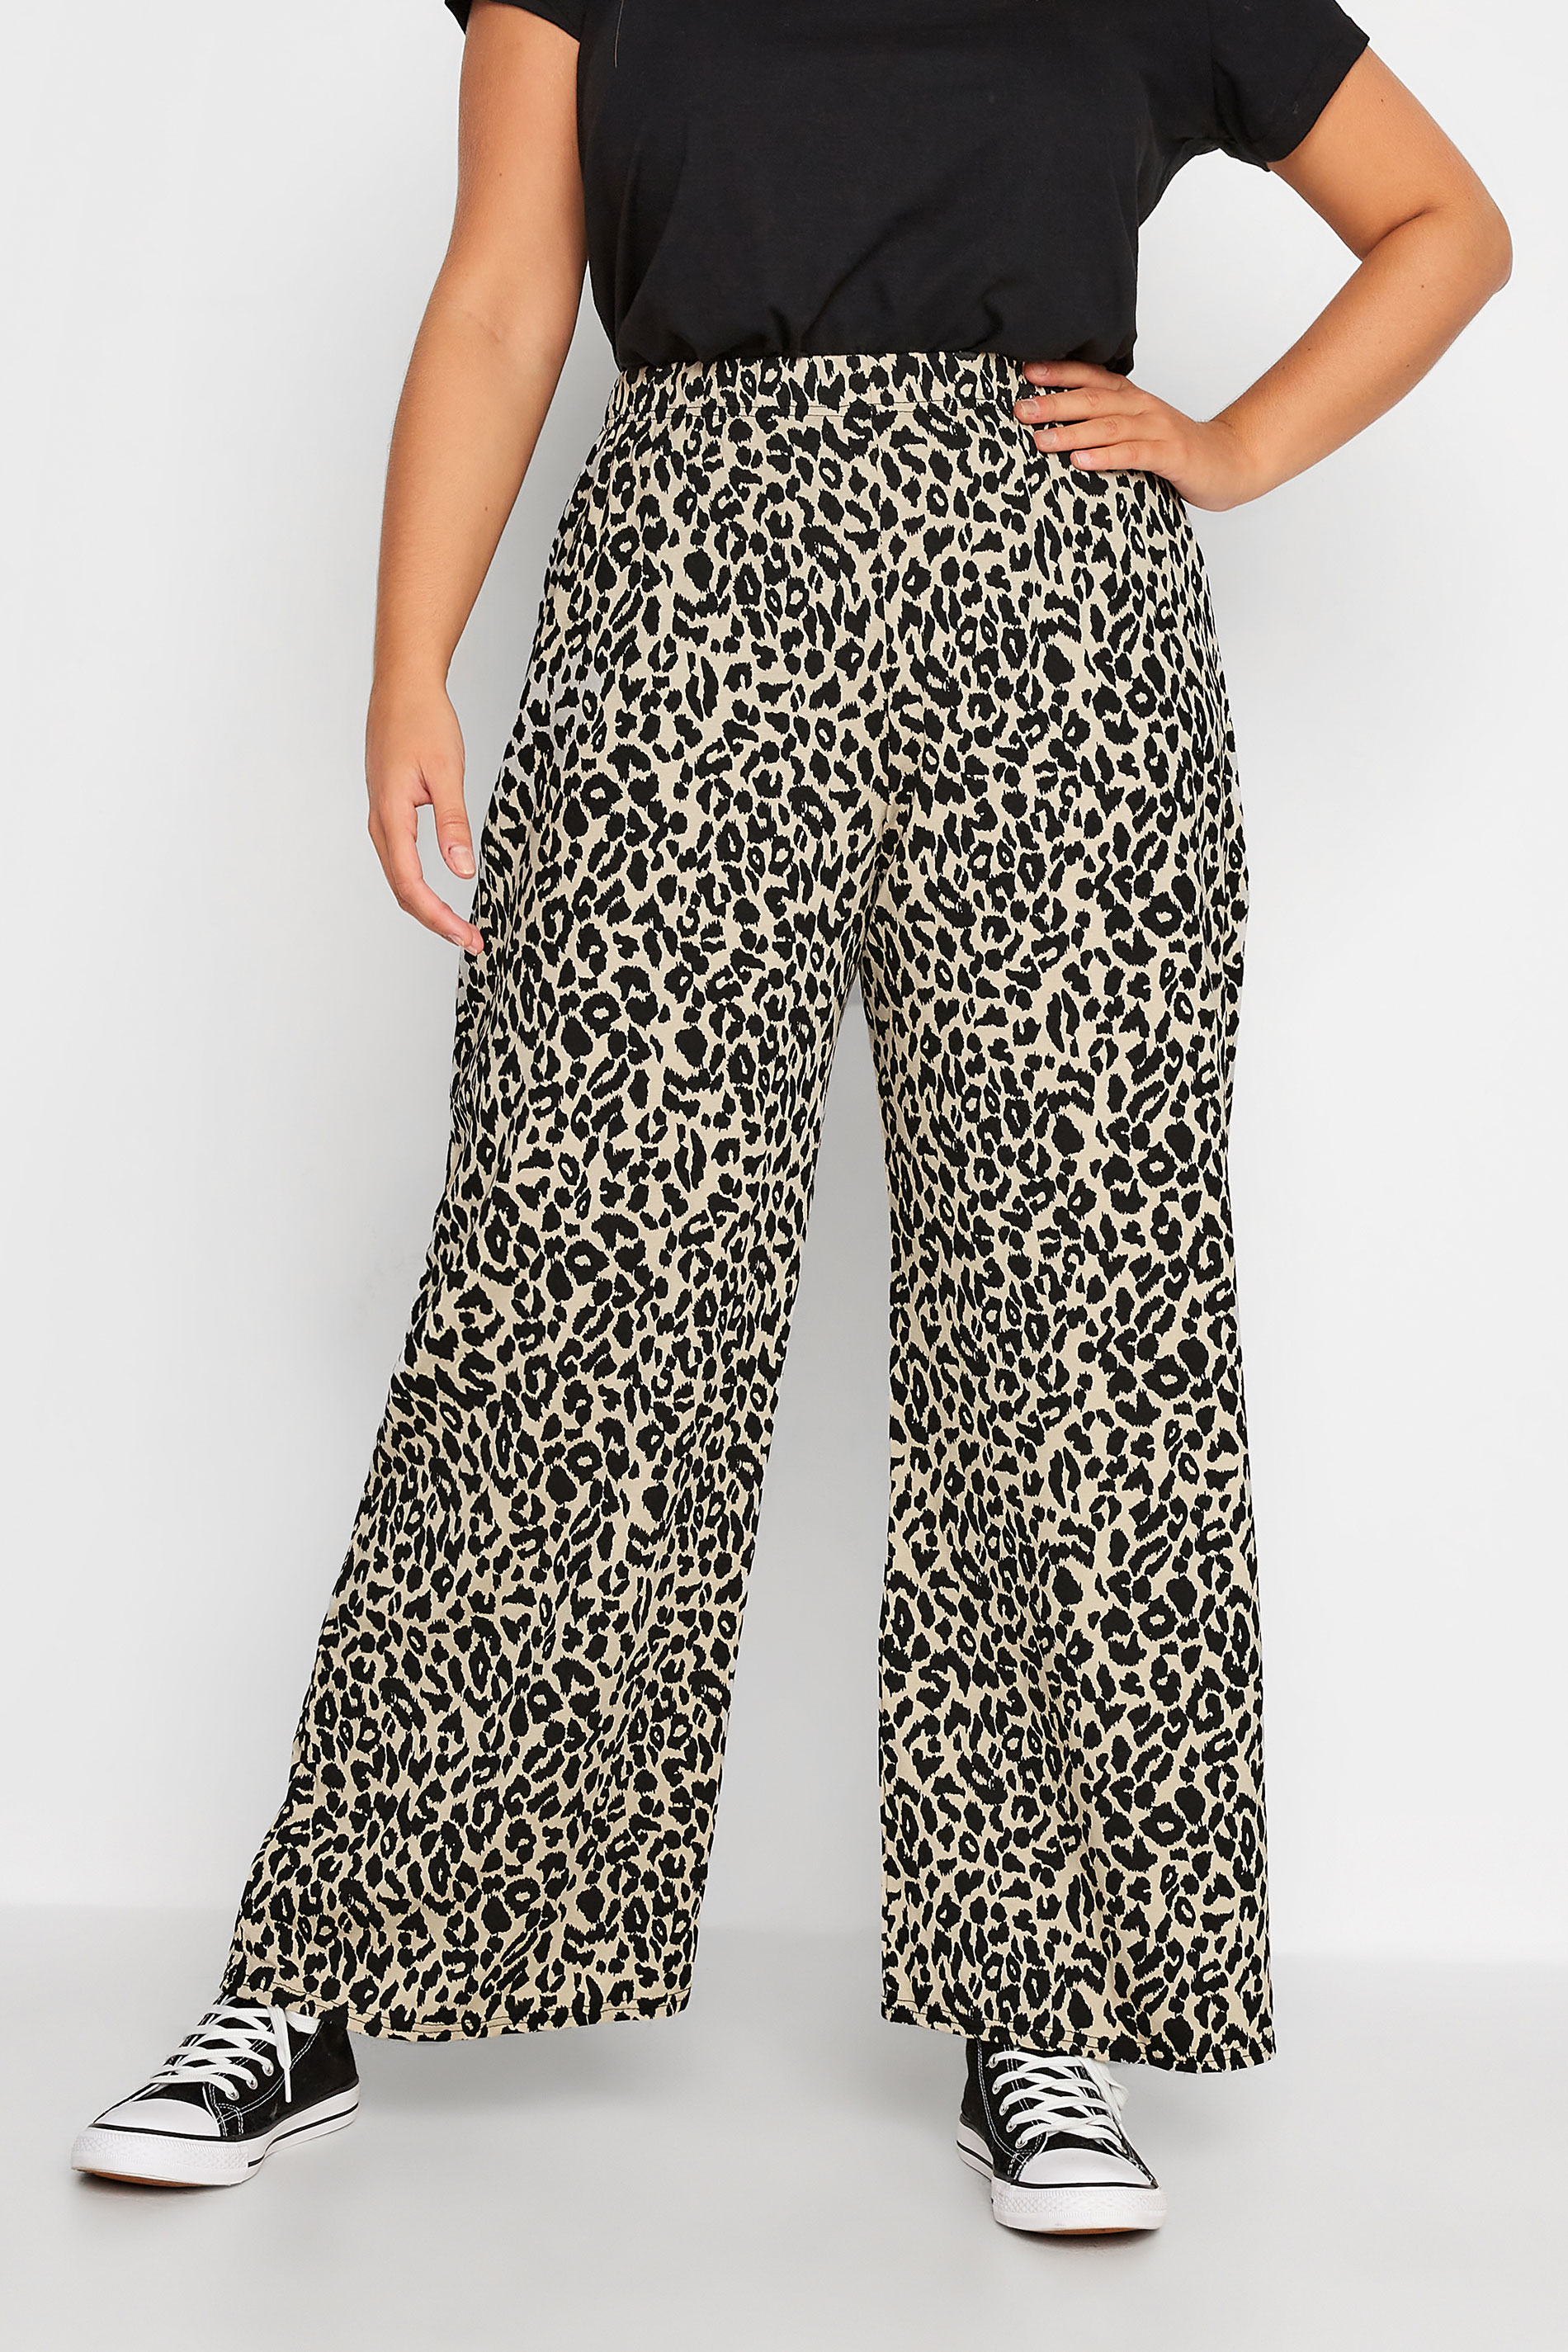 Joey Palazzo Trousers  Dancing Leopard Lilac Leopard Love Cherish   Dancing Leopard